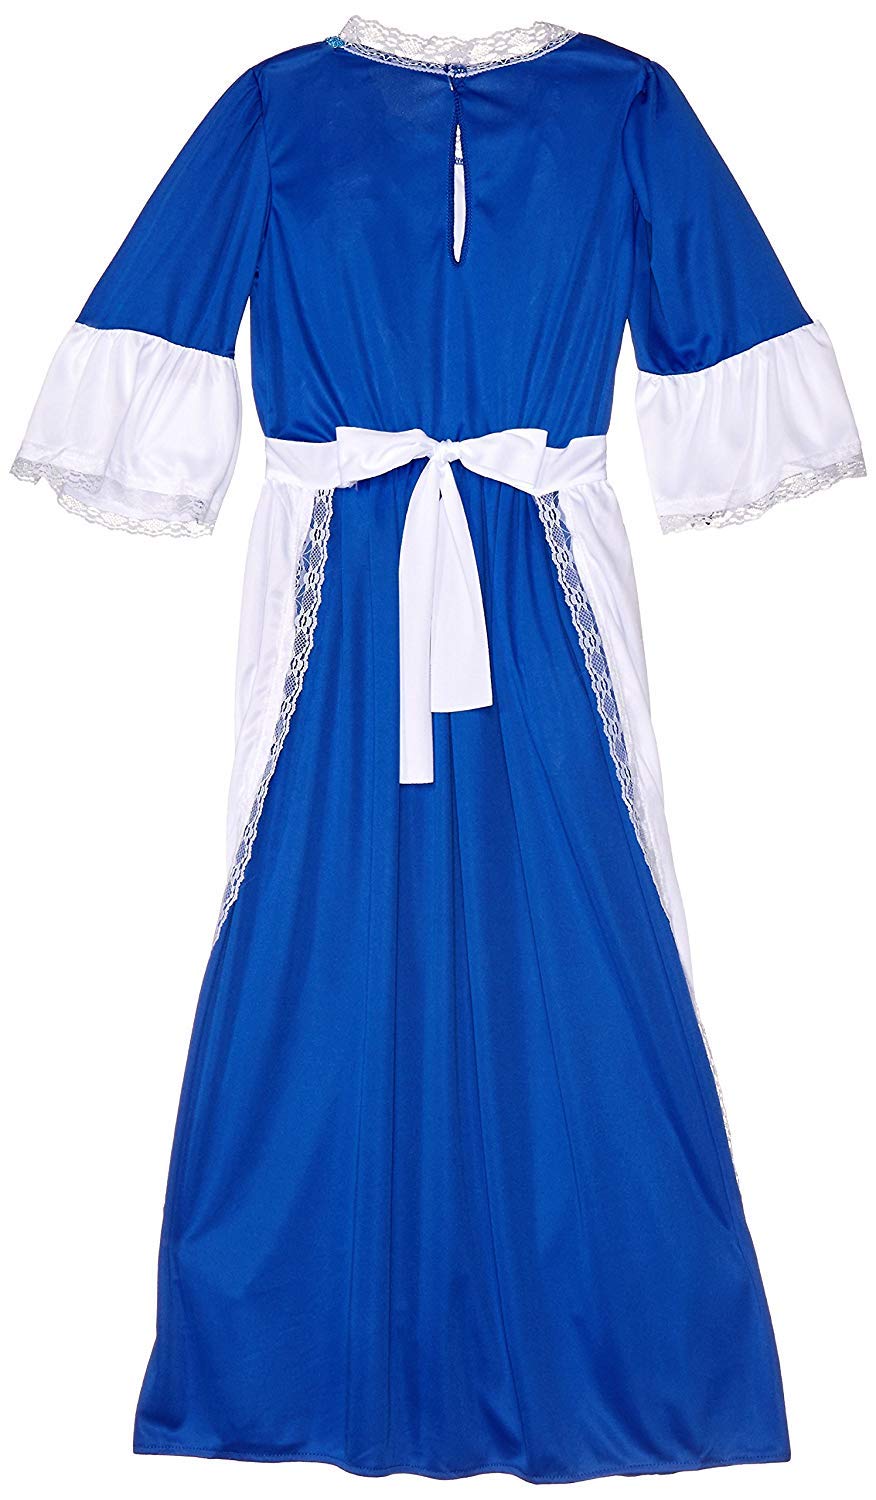 Rubie's Child's Forum Colonial Girl Costume Dress, Large